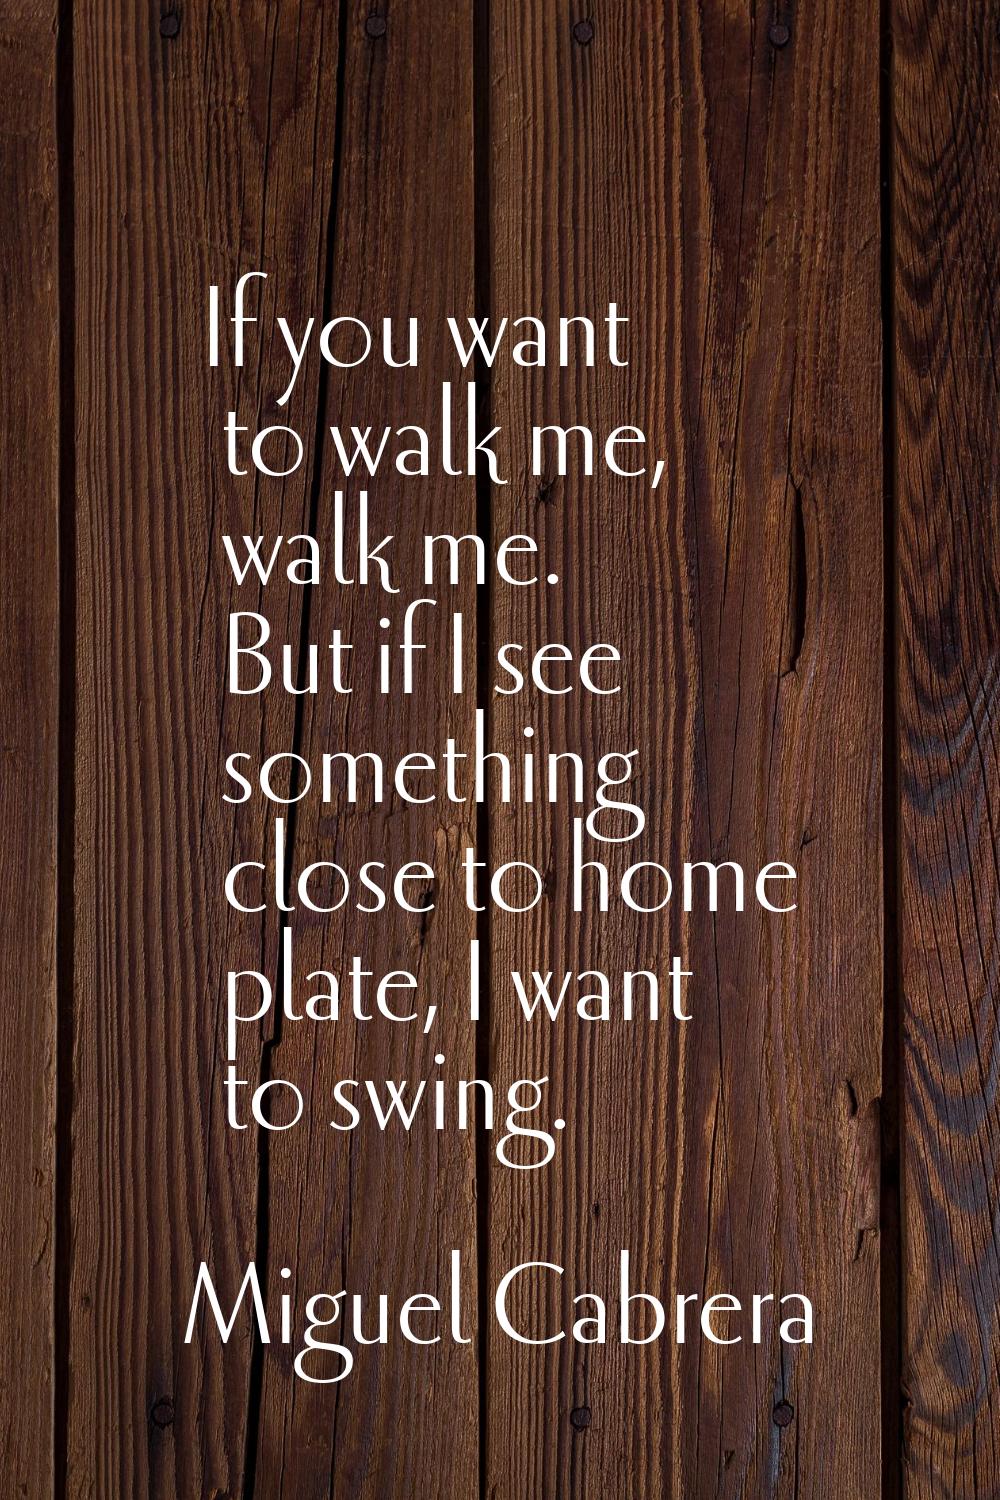 If you want to walk me, walk me. But if I see something close to home plate, I want to swing.